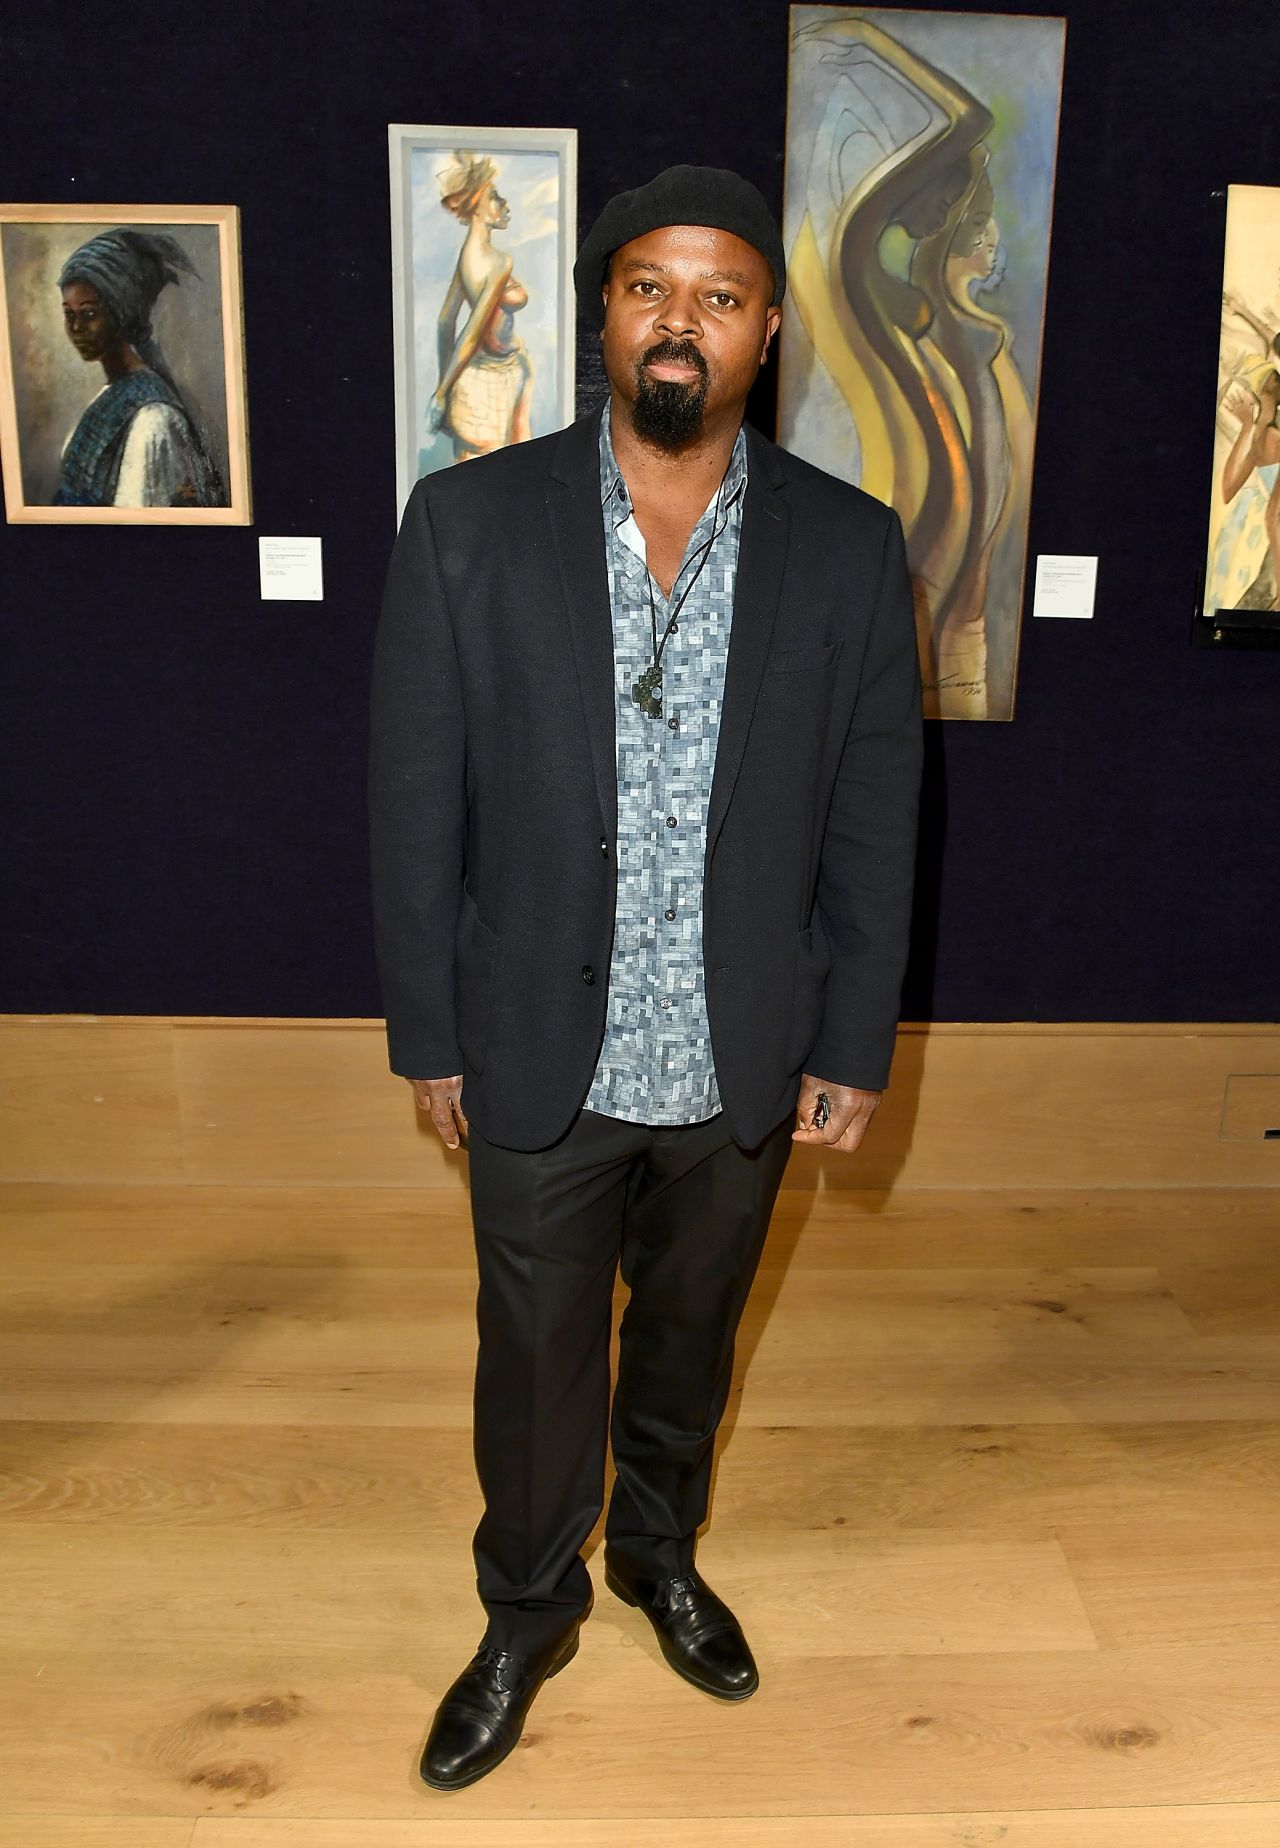 Internationally celebrated Nigerian author <strong>Ben Okri</strong> has had his novels, poetry and short stories translated into more than 20 languages.  <br />In 1991 he became the youngest ever winner of the Booker Prize, for "The Famished Road." He has also won the Commonwealth Writers Prize for Africa, and the Aga Khan Prize for Fiction.<br />He lives in London, where he is a Fellow of the Royal Society of Literature.<br />